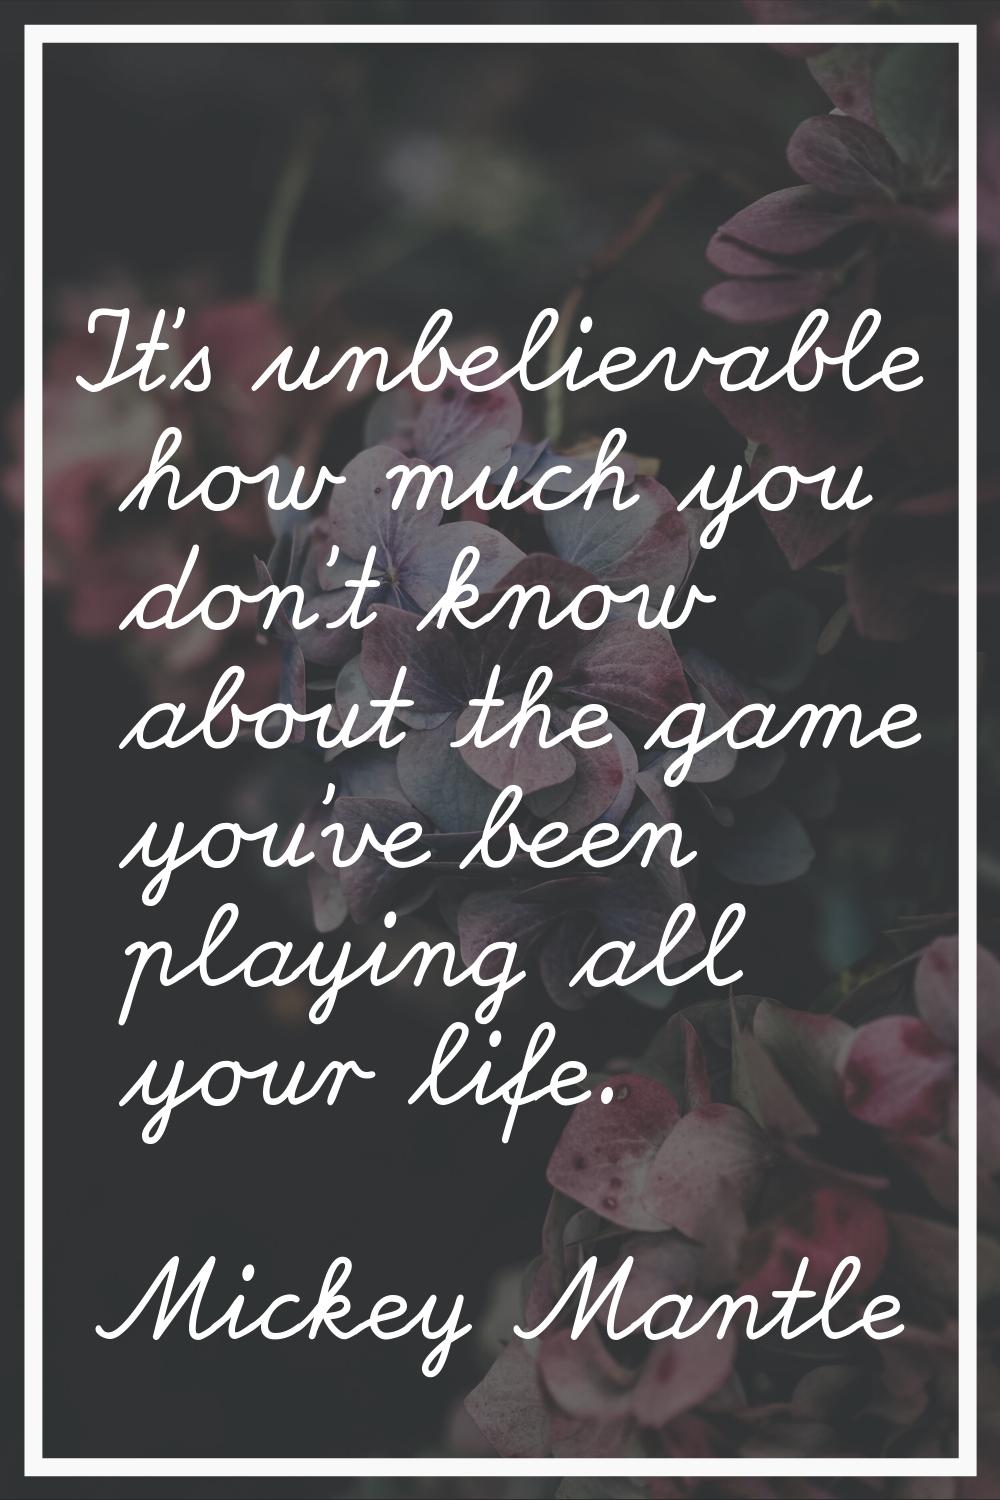 It's unbelievable how much you don't know about the game you've been playing all your life.